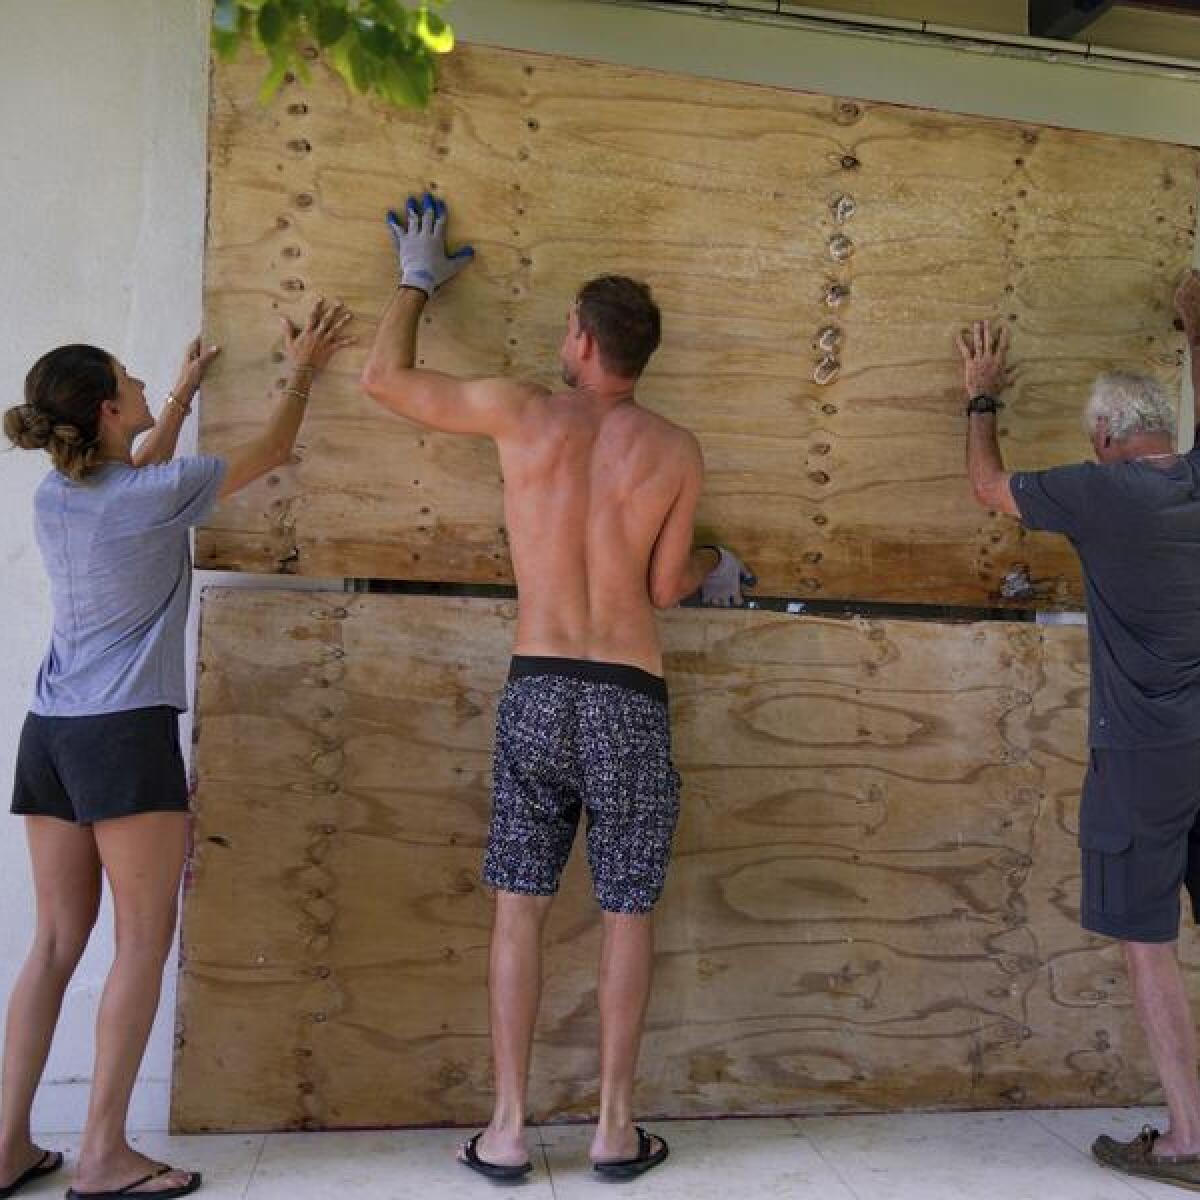 Residents preparing their home for a storm